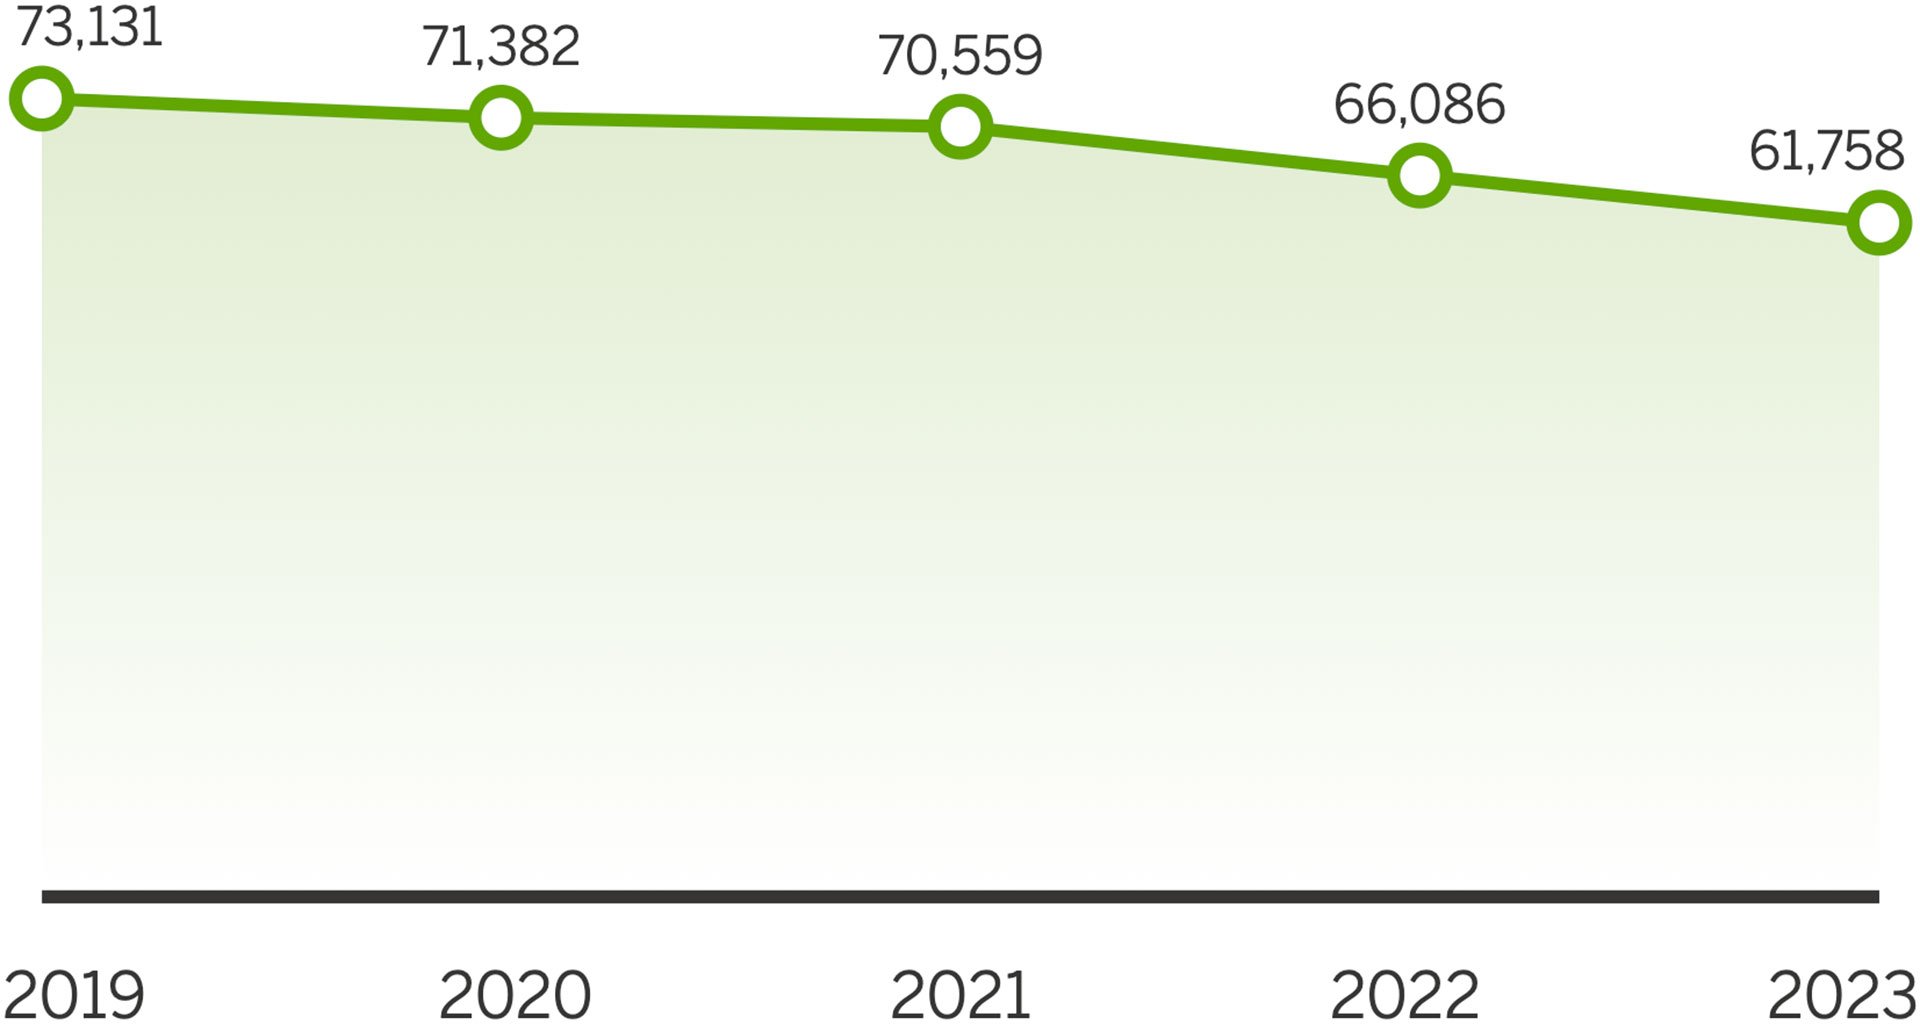 Graph showing values of 73,131-61,758 during 2019-2023